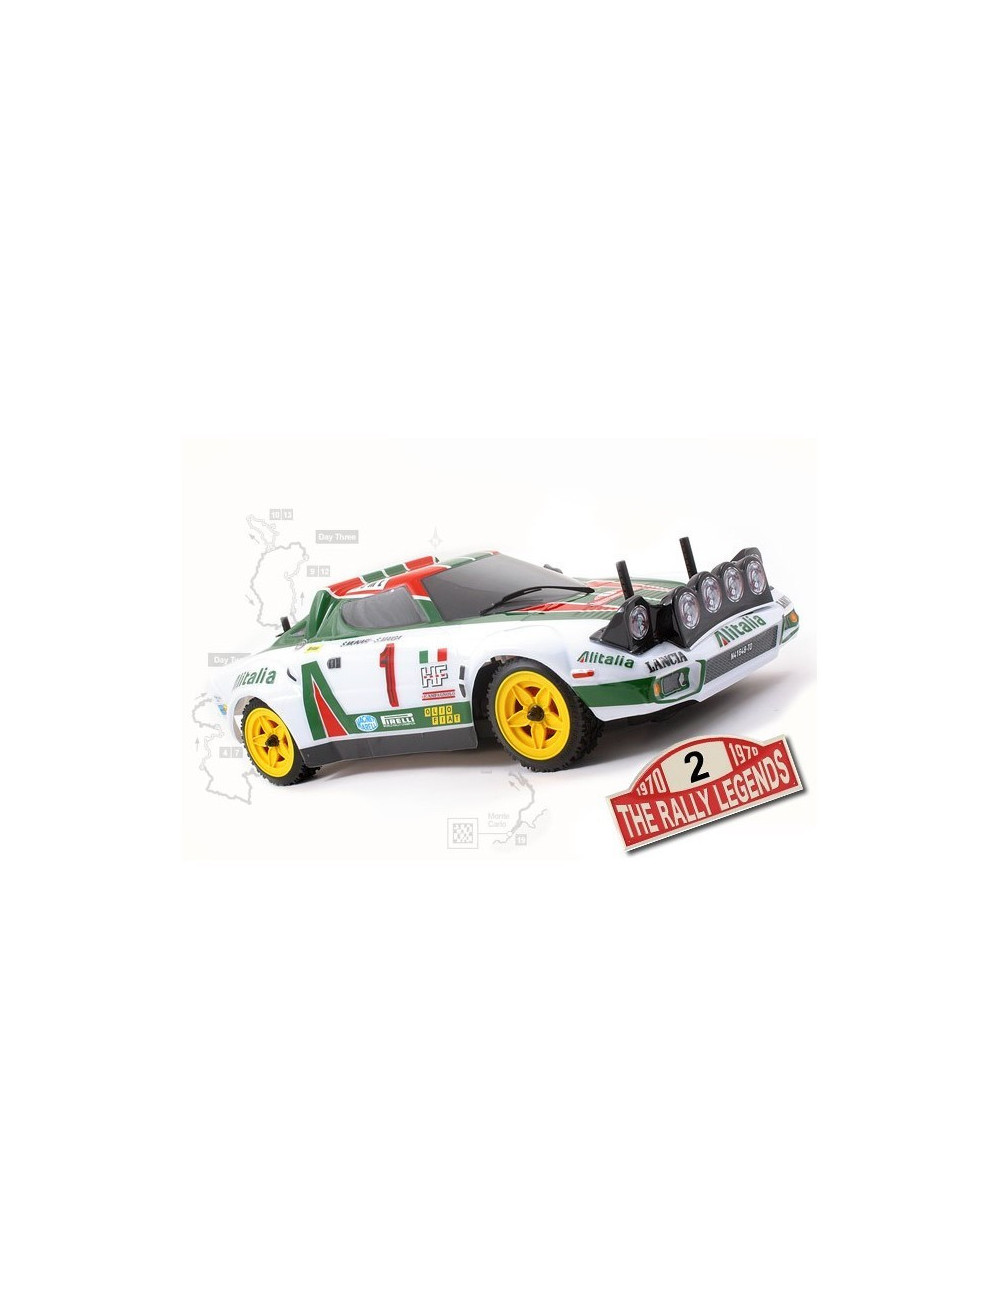 THE RALLY LEGEND LANCIA STRATOS GR.4 RTR 1:10